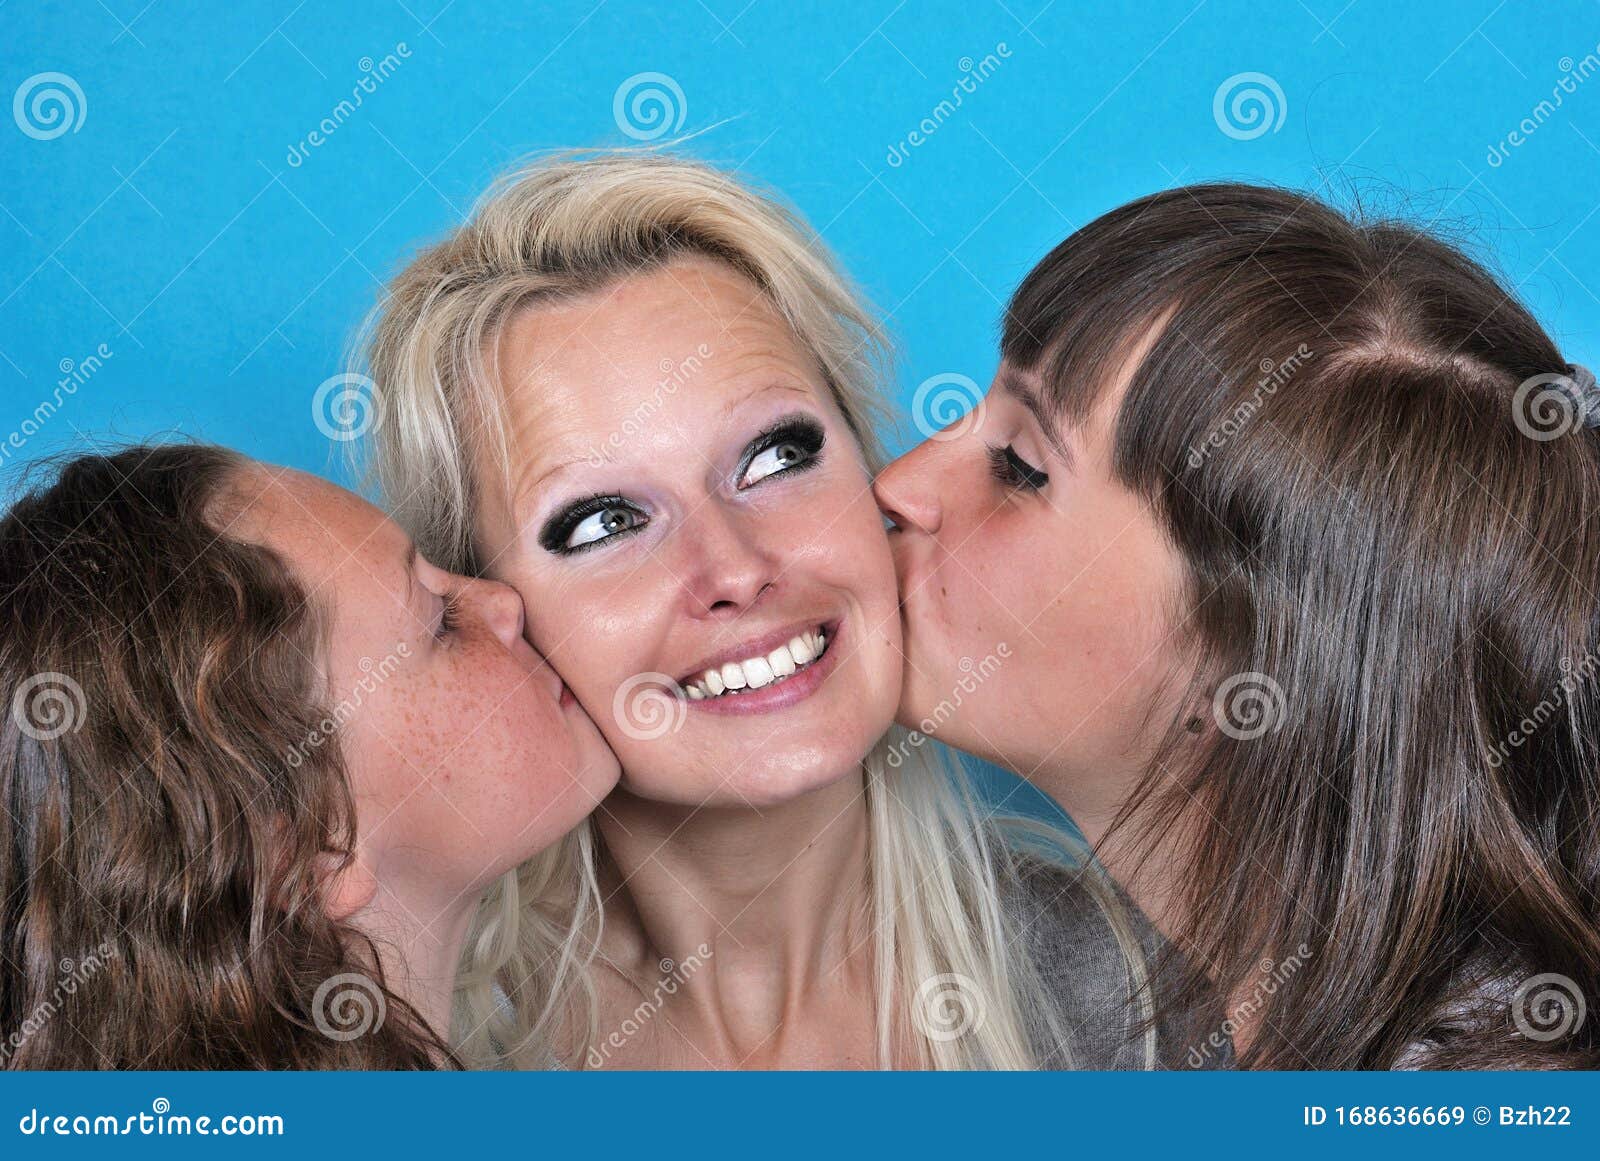 600 Mother Kissing Her Daughter Cheek Photos - Free & Royalty-Free Stoc...